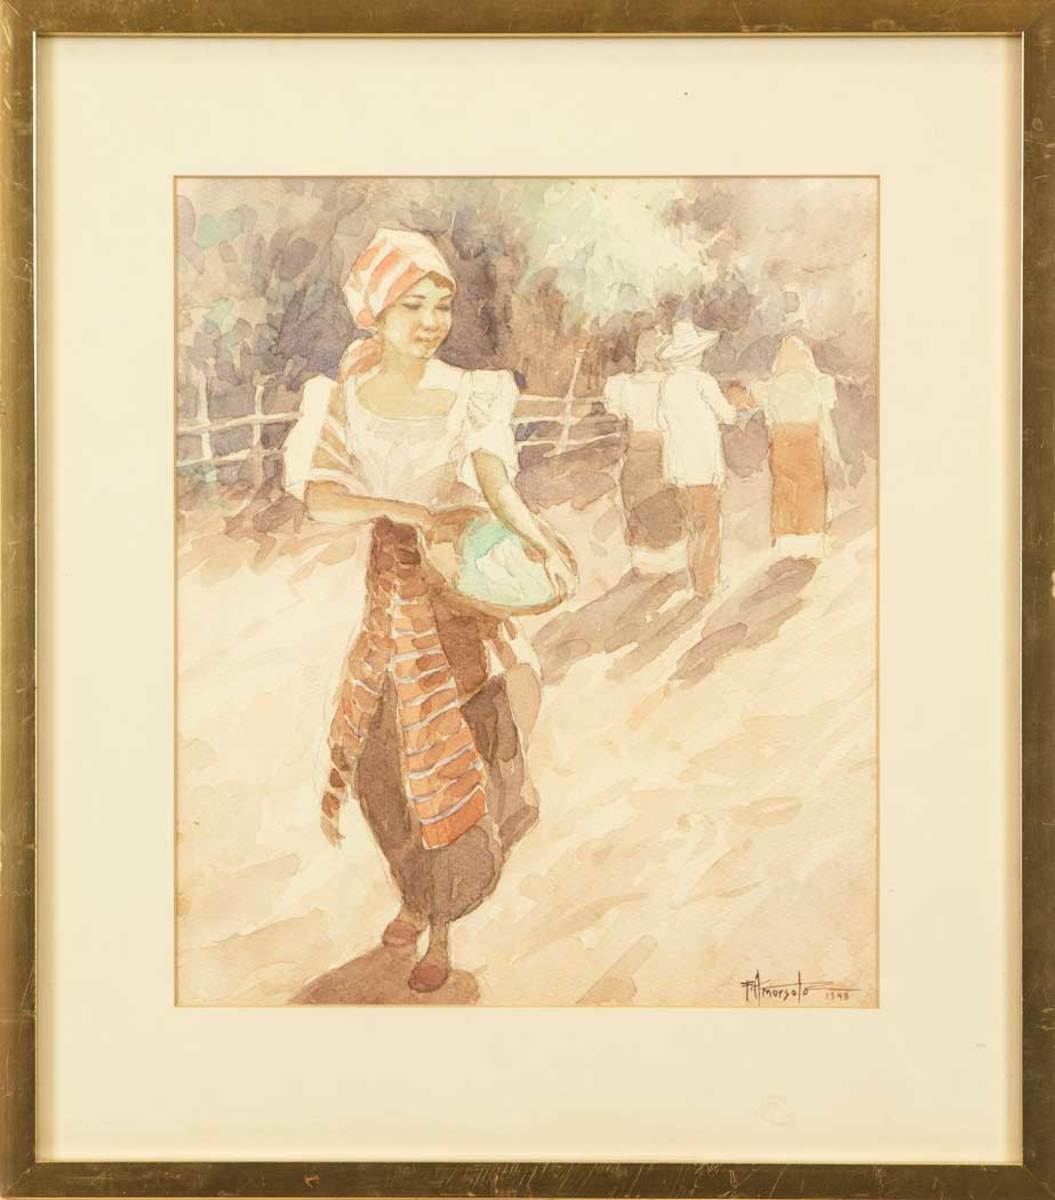 Framed Fernando Amorsolo (1892-1972) watercolor depicting a woman carrying a basket walking on a dirt road with figures in the background. Signed and dated (1948) lower right. Pre-auction estimate: $50,000-$100,000